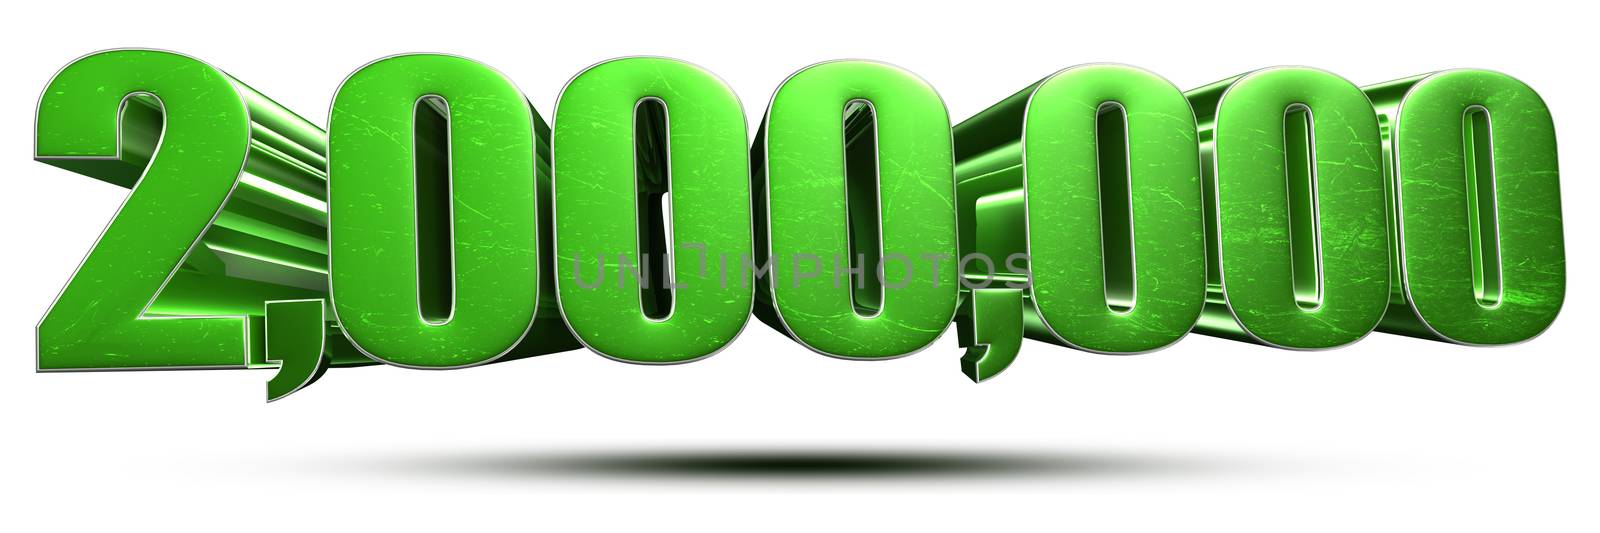 2 million numbers green 3d rendering on white background.(with Clipping Path).